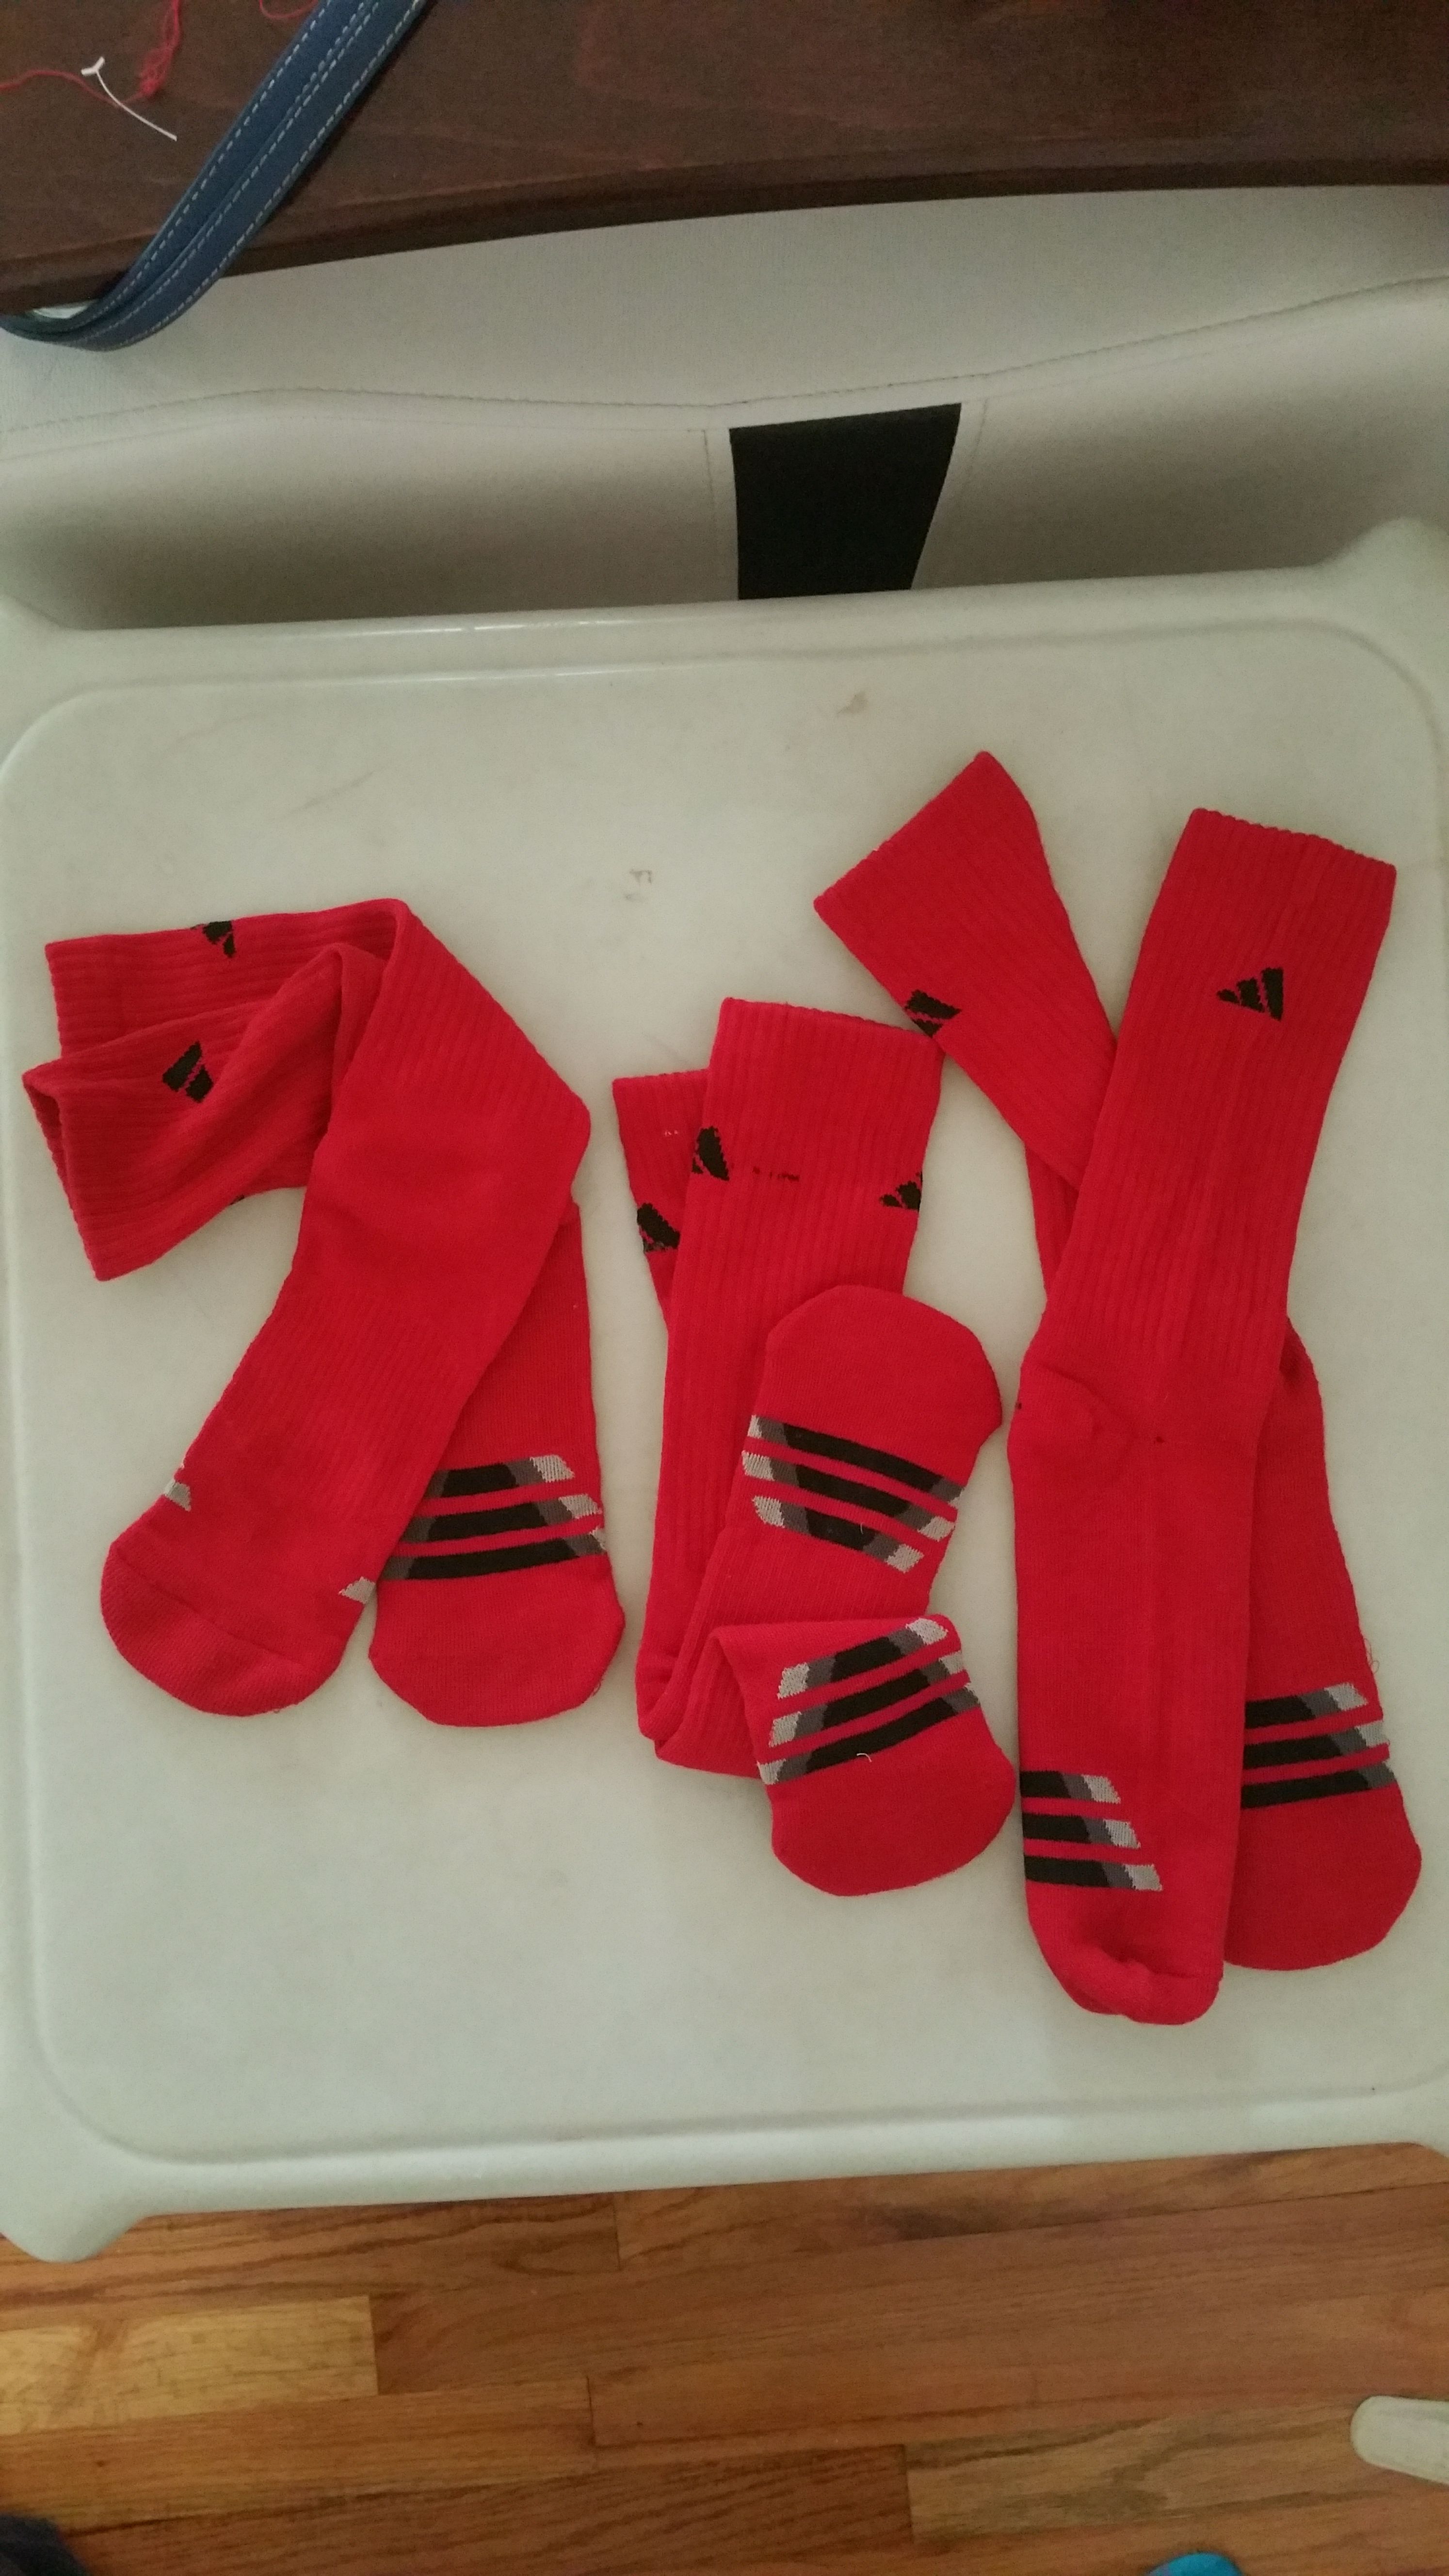 3 pairs Adidas socks S-L new with tag